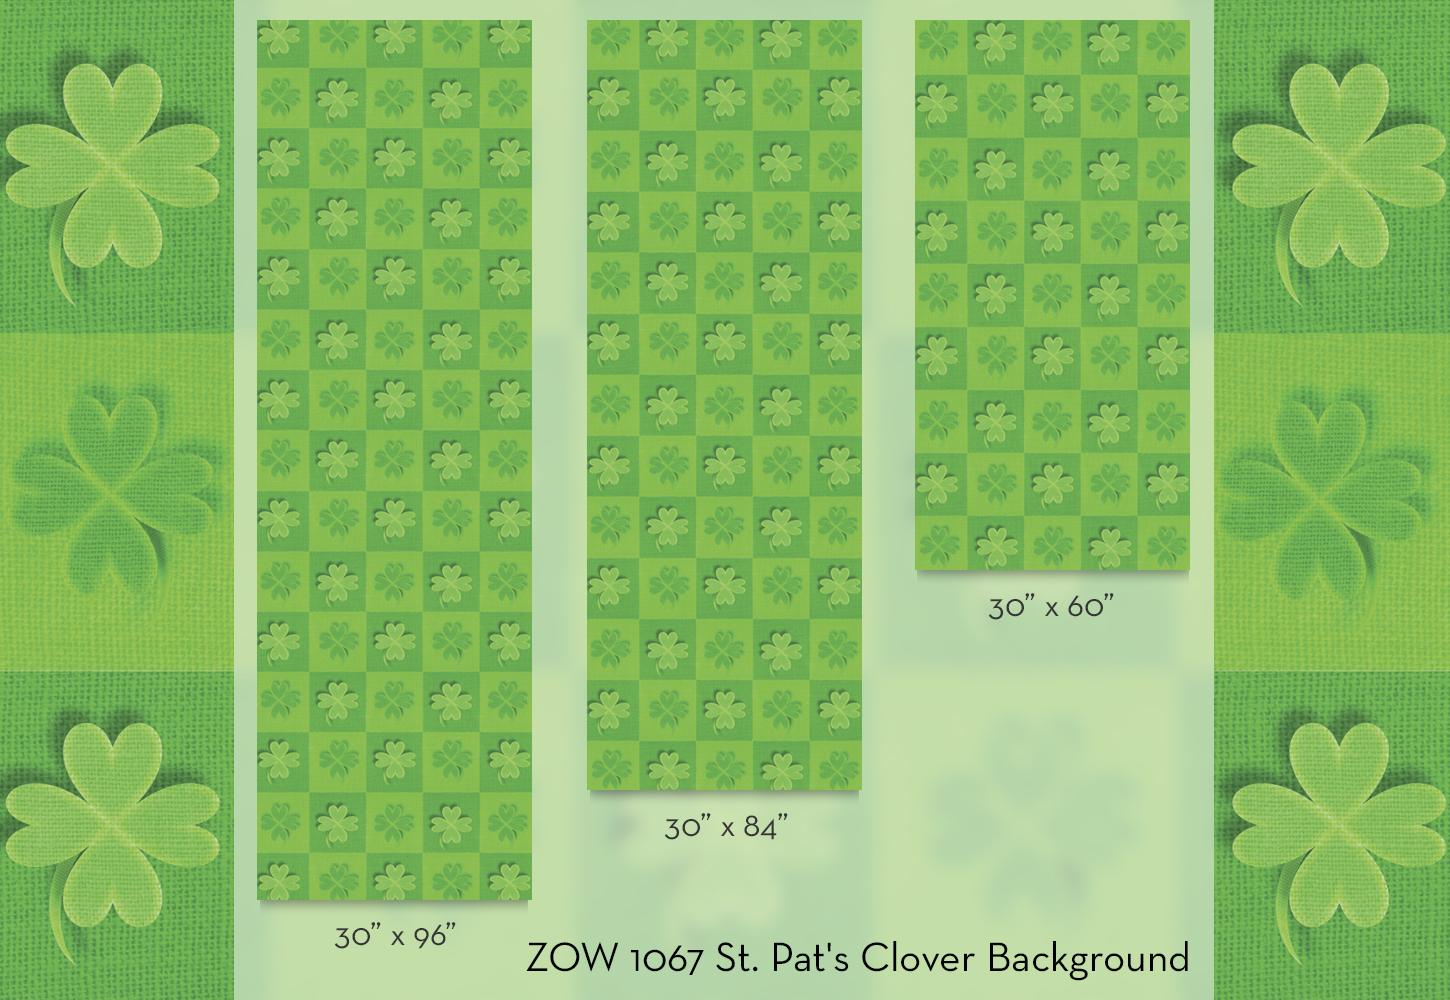 ZOW 1067 St. Pat's Clover Background